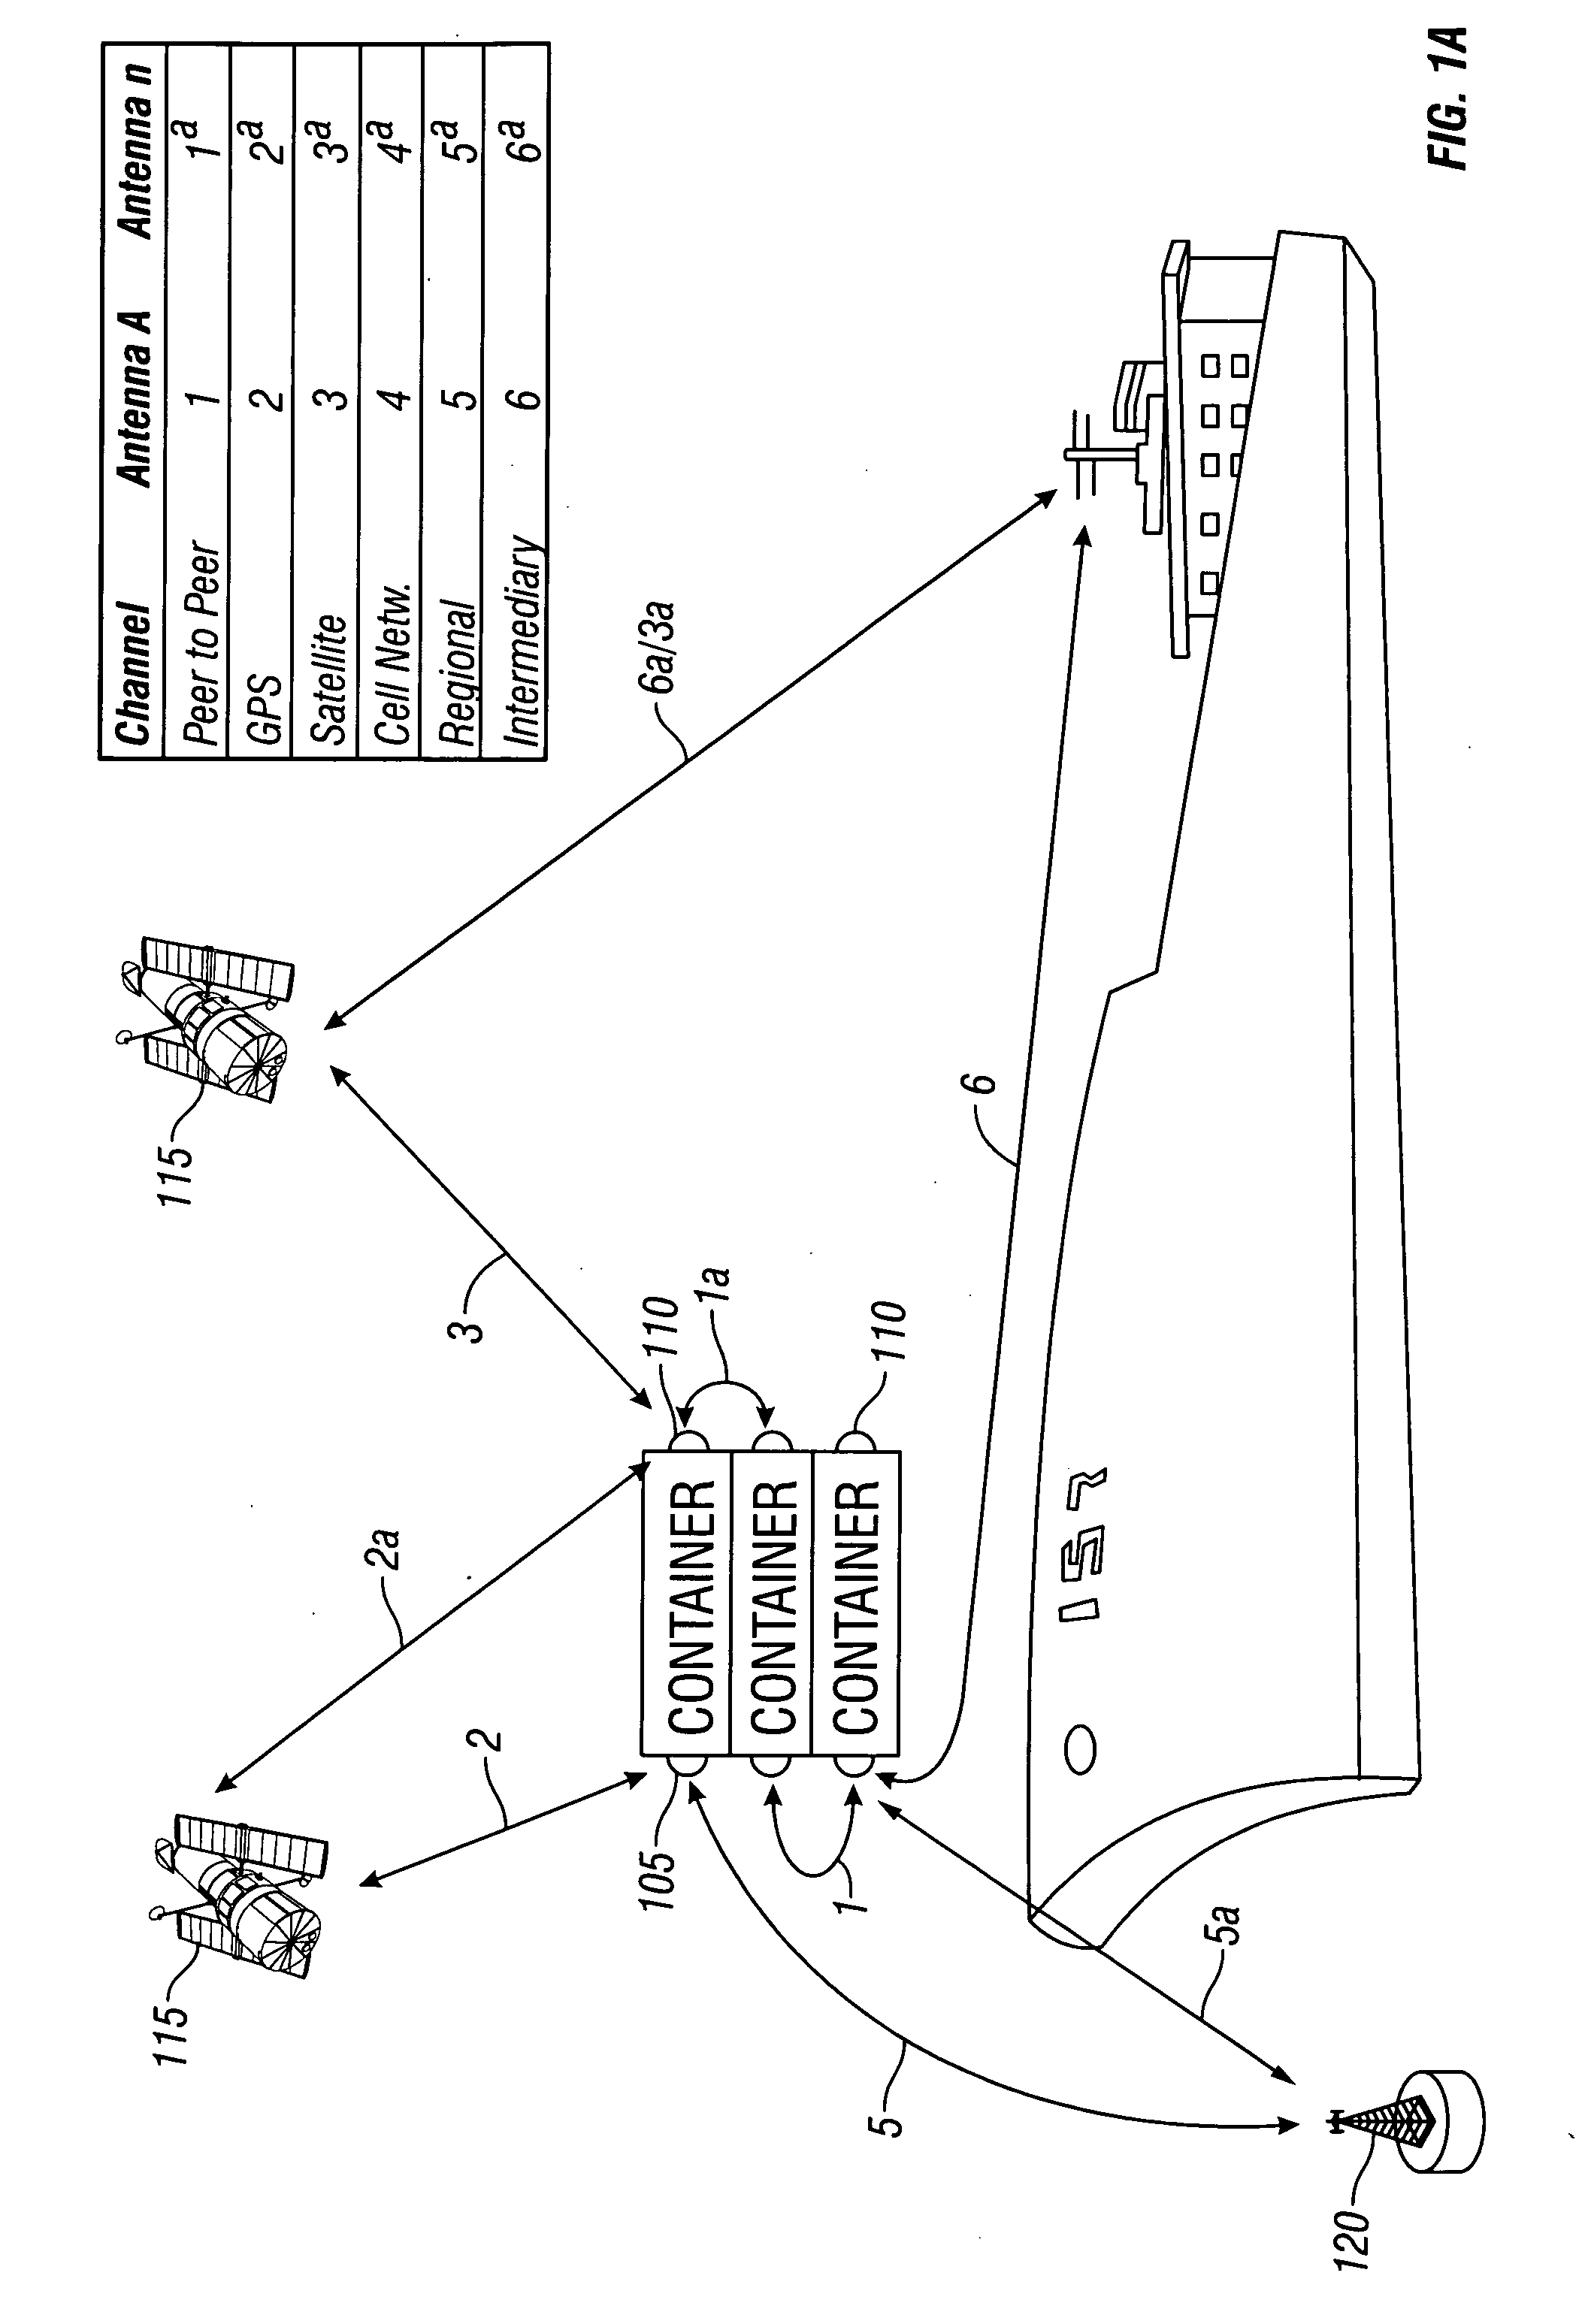 Trusted monitoring system and method